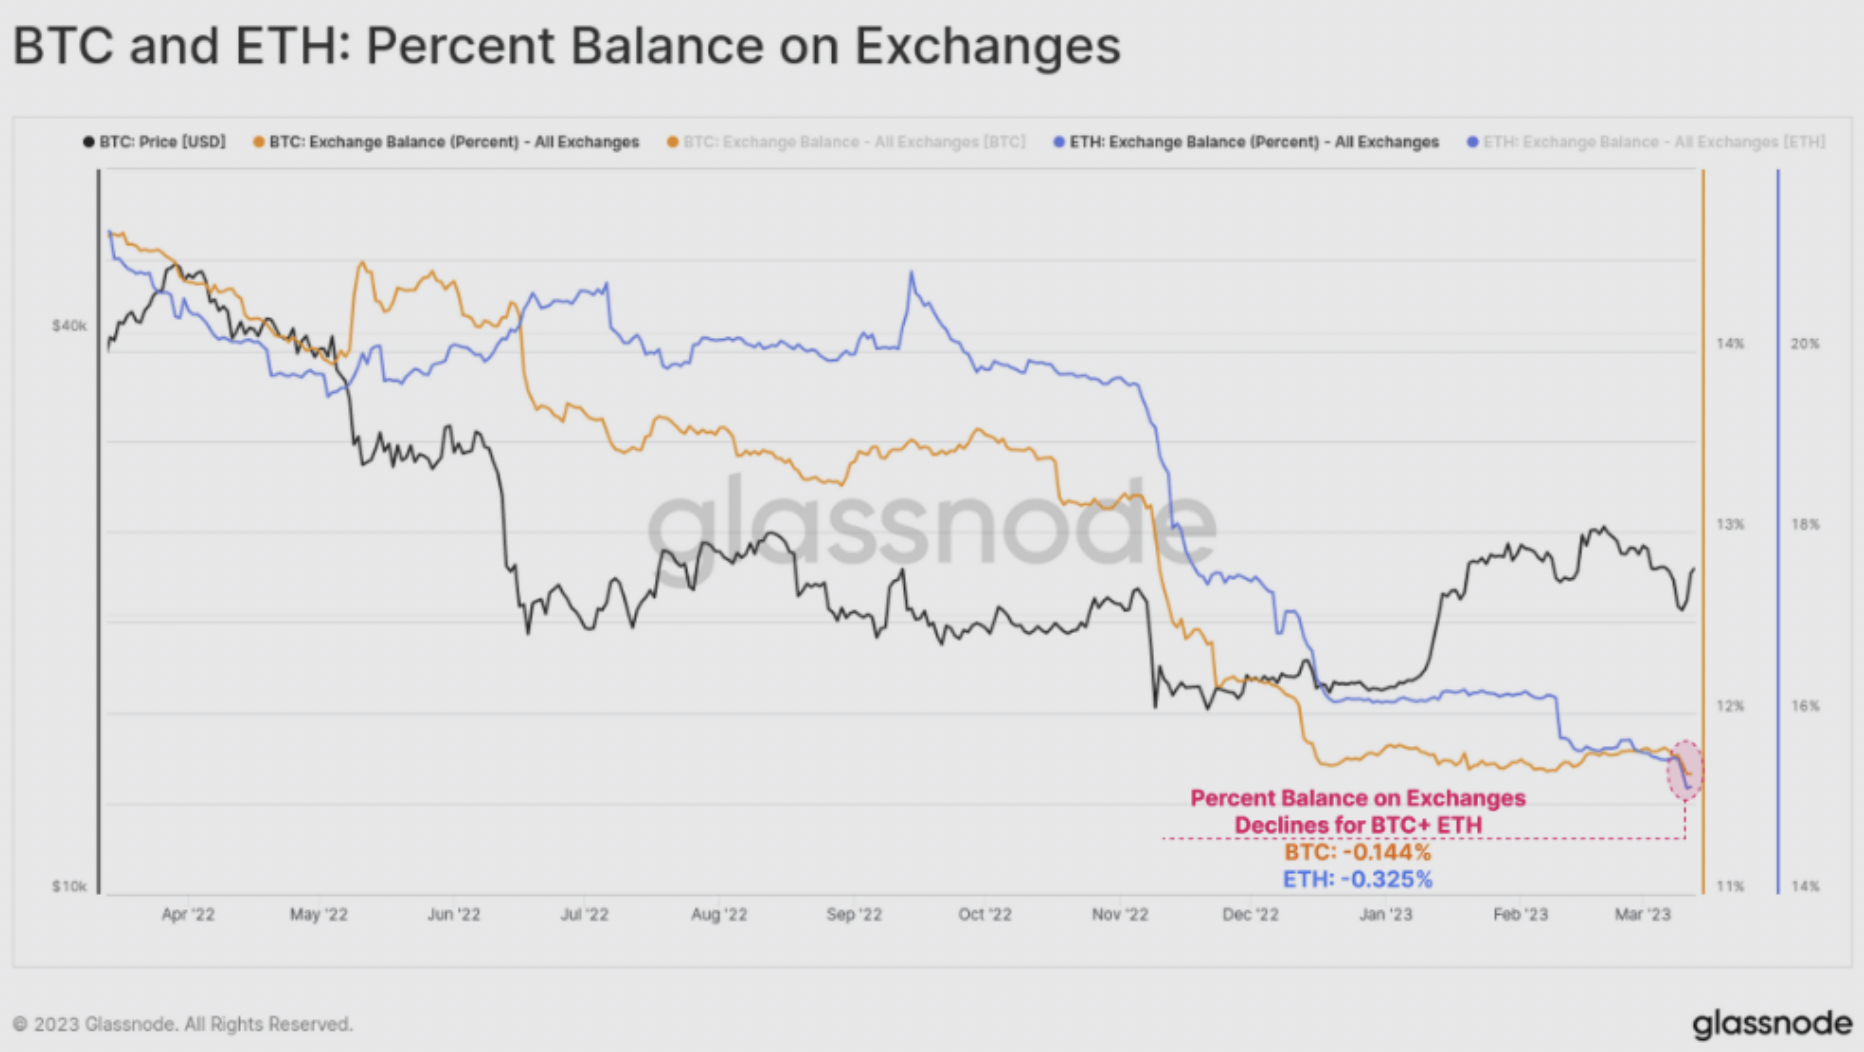 BTC and ETH: Percent Balance on Exchanges